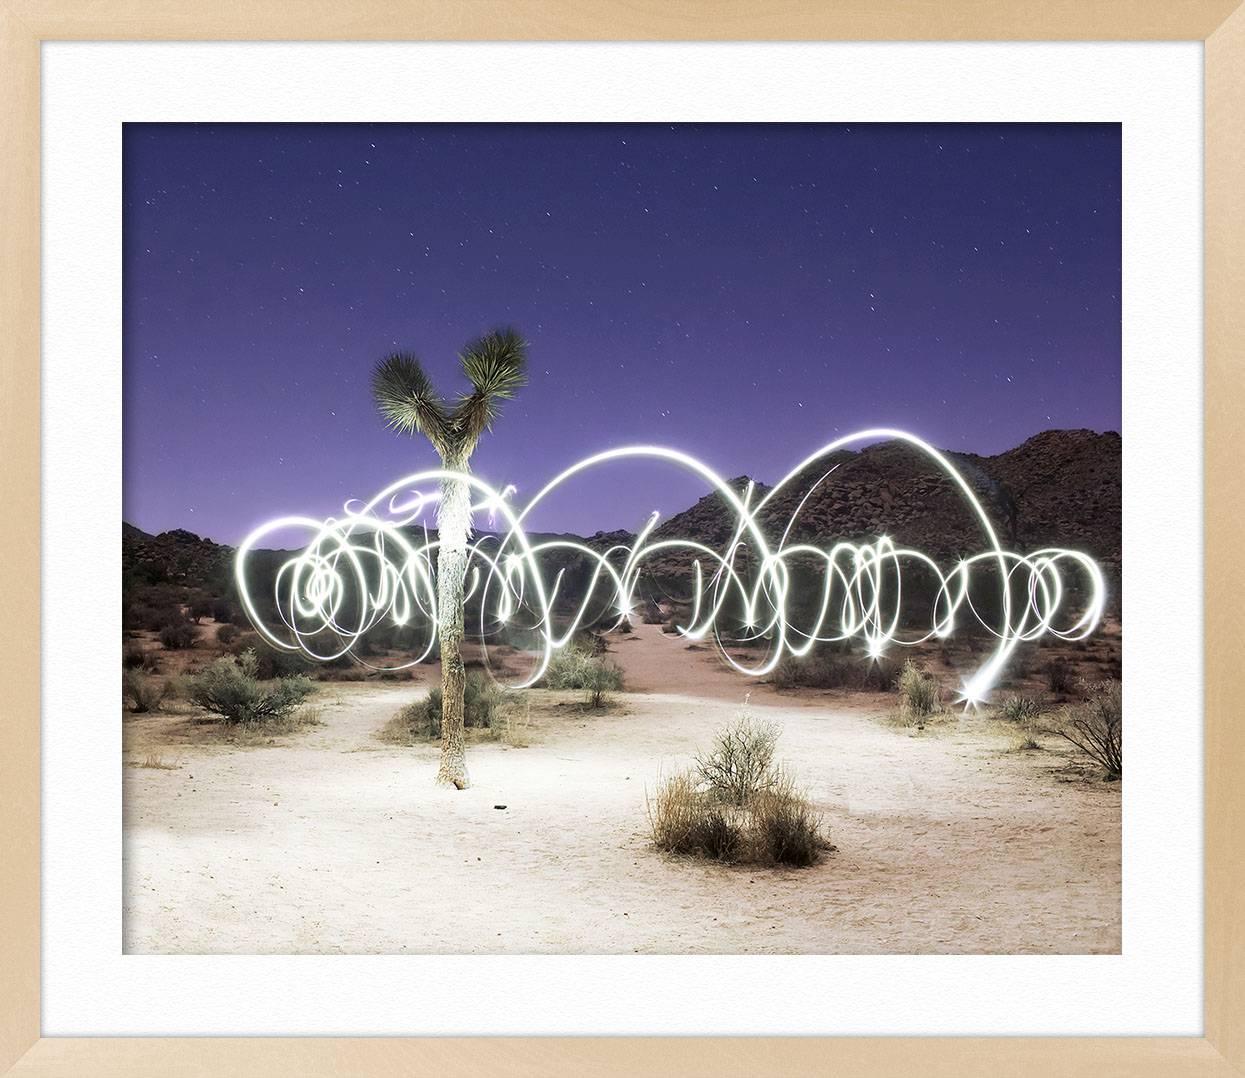 ABOUT THIS PIECE: French artist Ludwig Favre traveled to California to shoot the state's most iconic landscape and architecture.

ABOUT THIS ARTIST: Photographer Ludwig Favre was born in Senlis, France in 1976. Favre now lives and works in Paris.